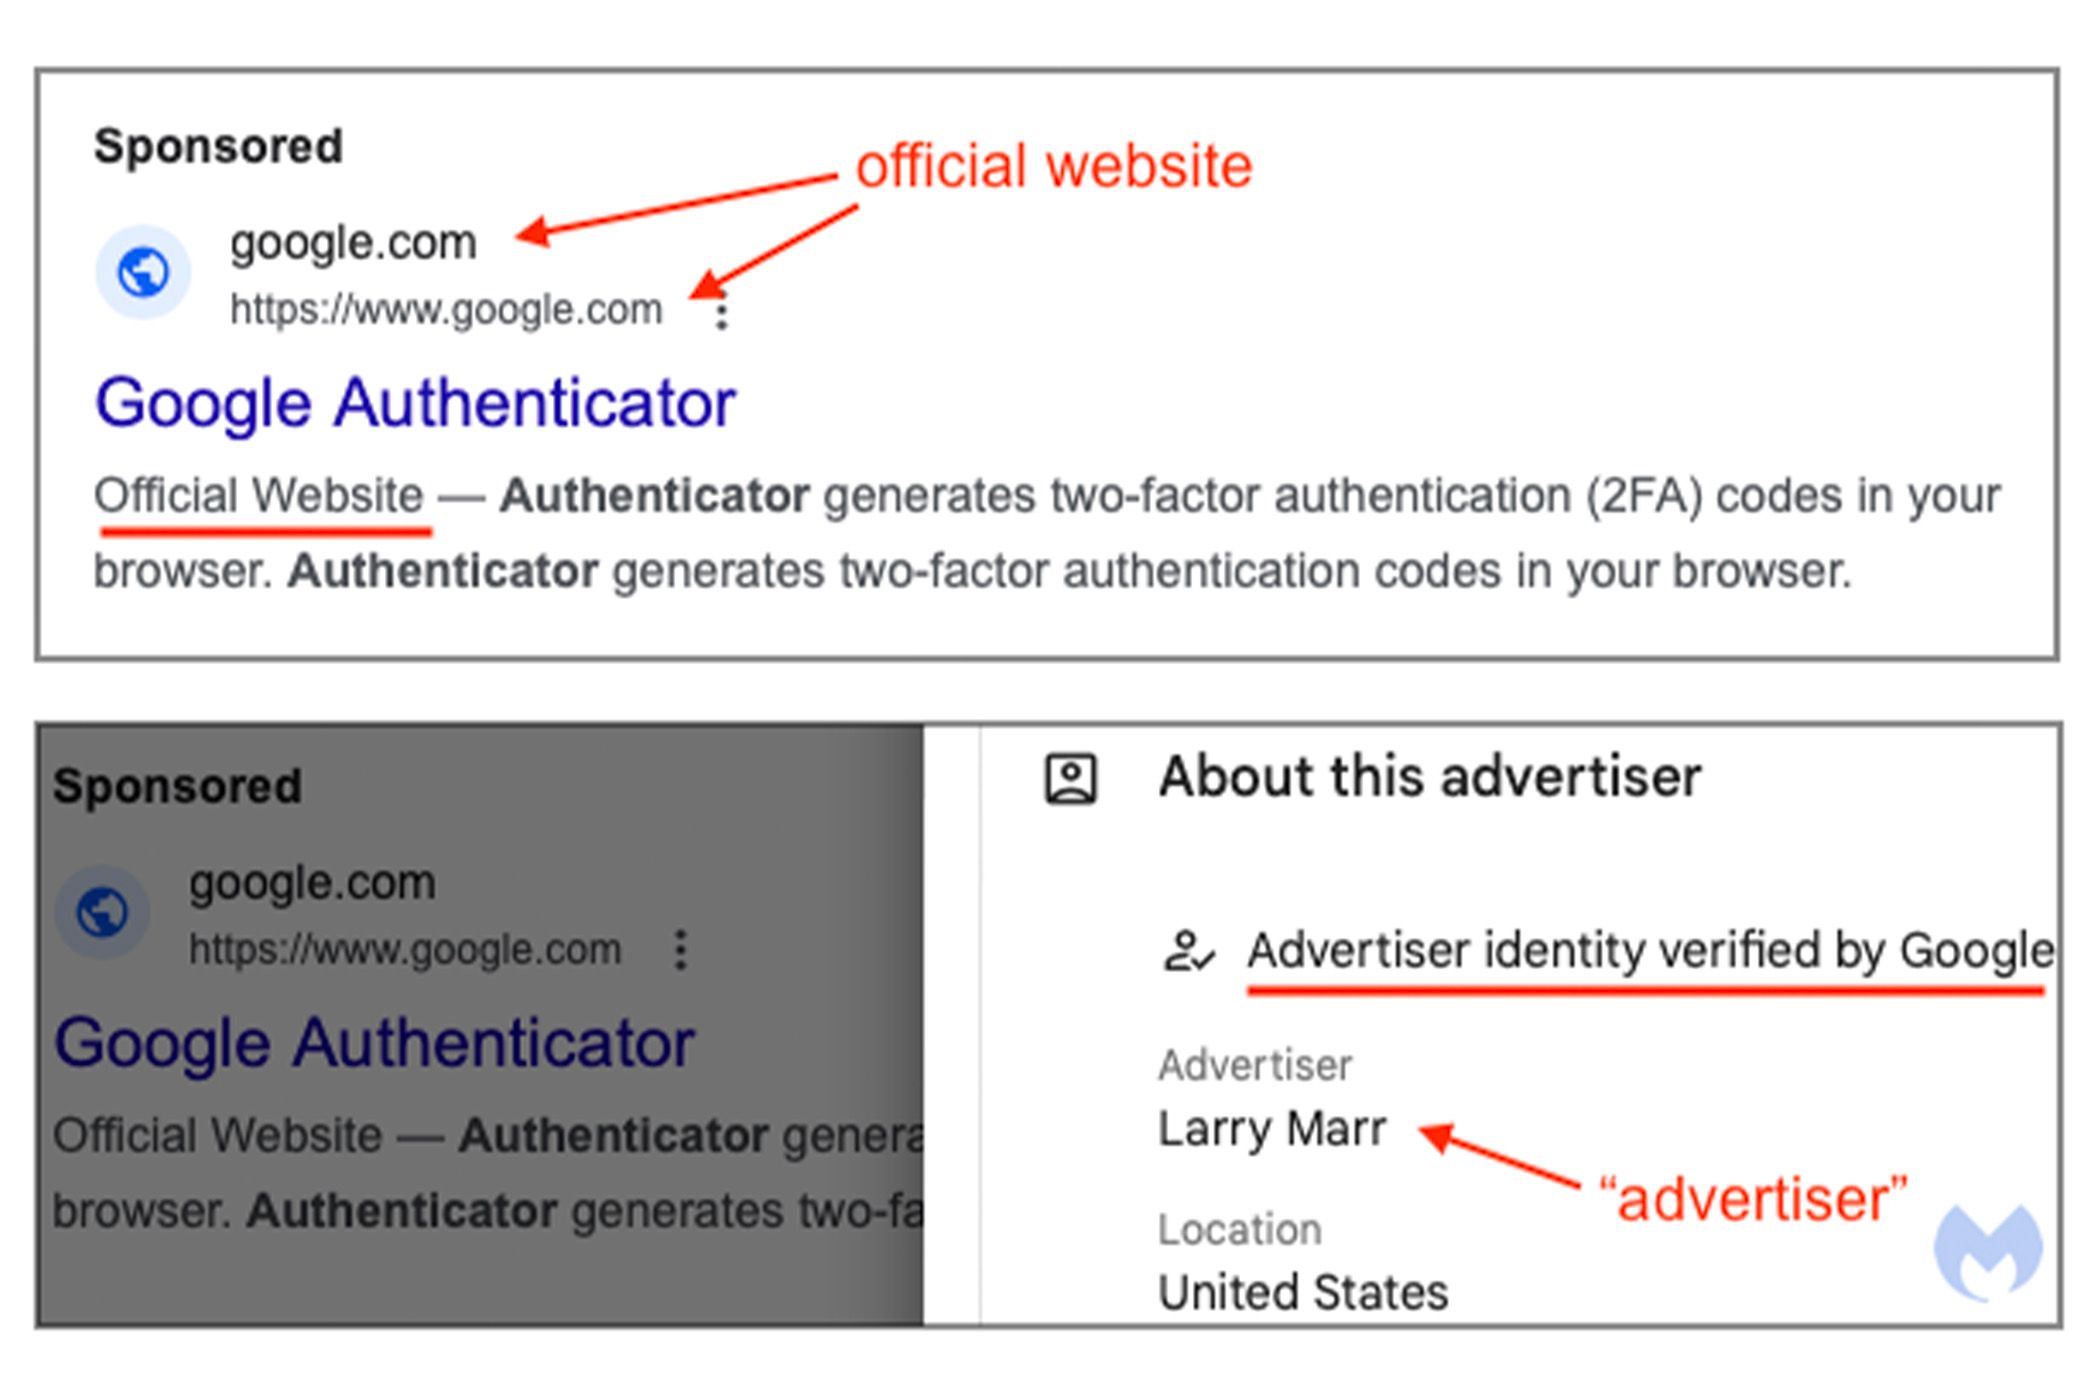 Screenshots of the fraudulent Google Authenticator ad in Google Search.